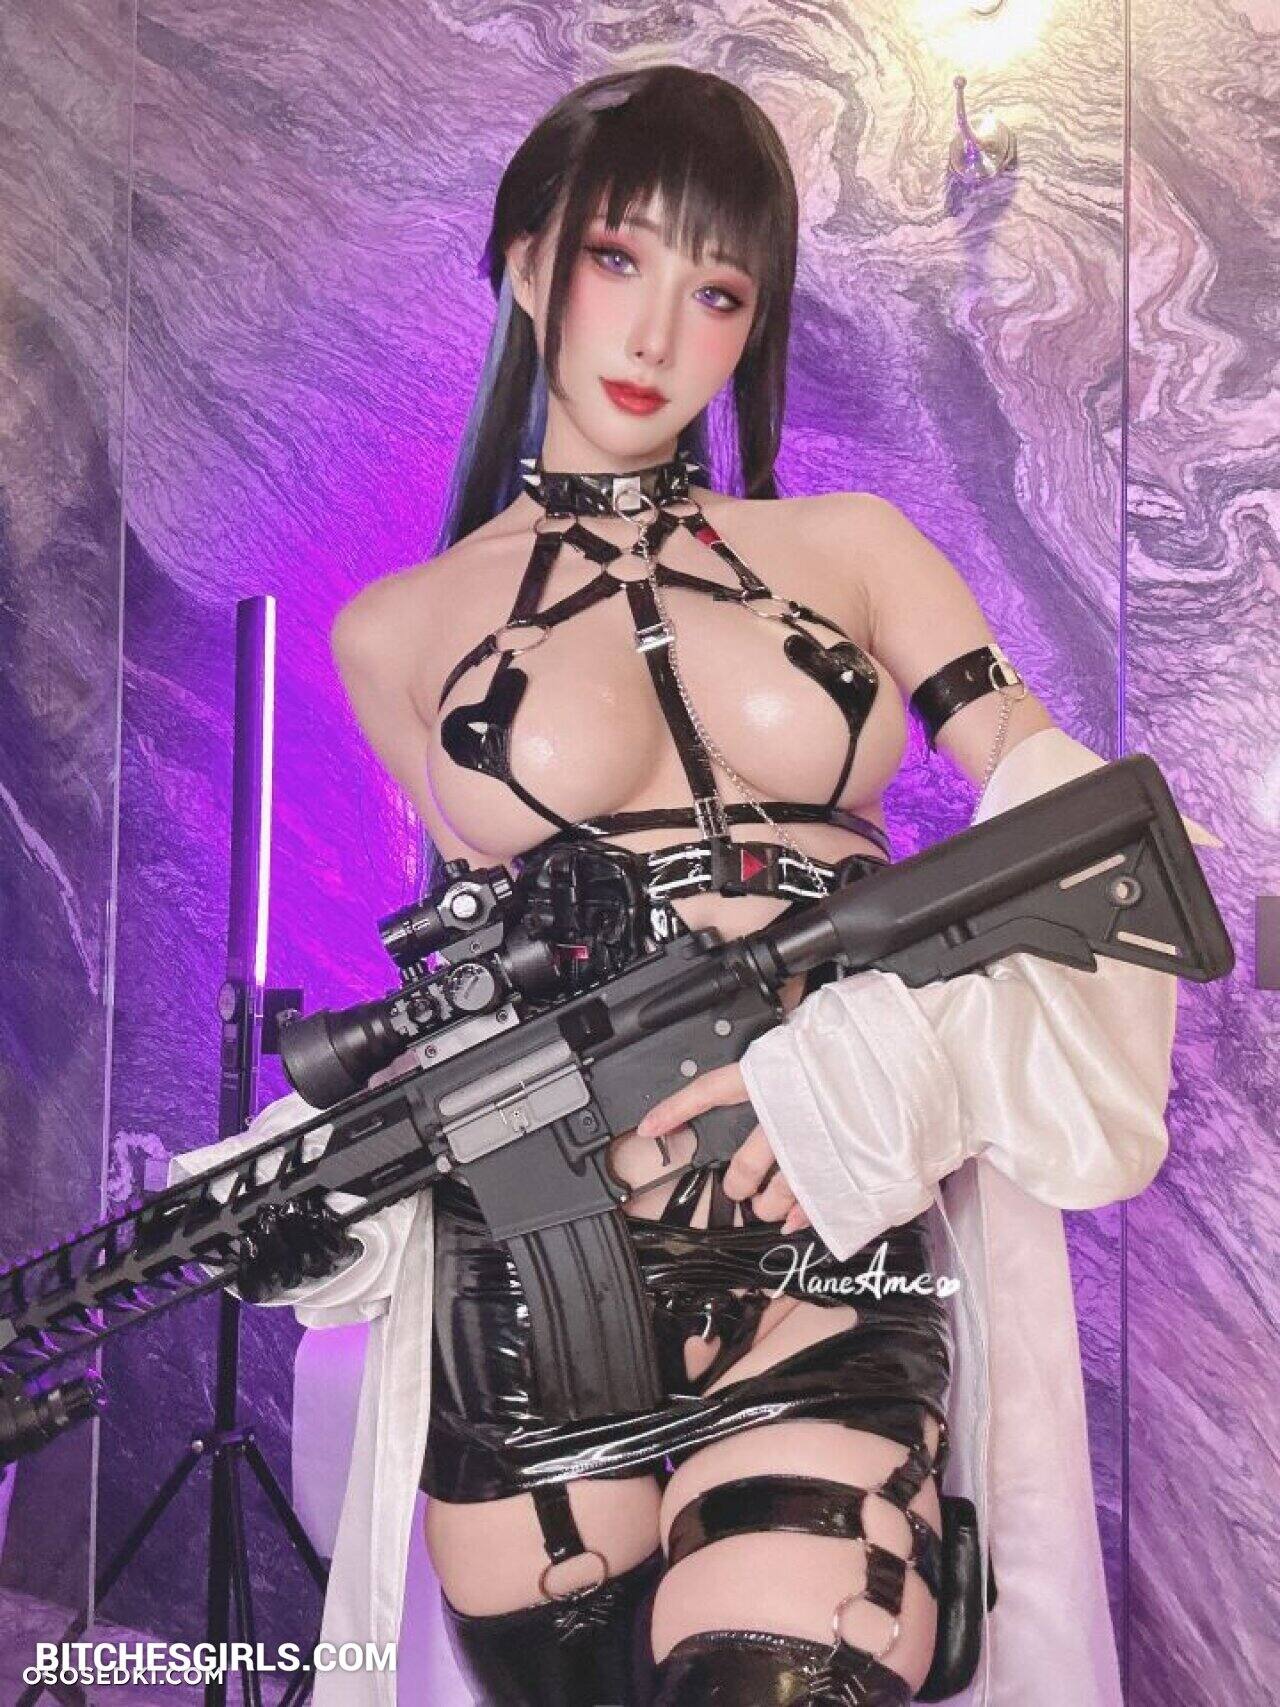 HaneAme, the popular Instagram model and cosplay enthusiast, has taken the internet by storm with her ero-aesthetic style and captivating portrayals of characters. With a massive following of 392K followers, she showcases her talent through photos and videos of her stunning cosplay outfits. Not only does HaneAme create exclusive content for her patrons on Patreon, but she has also collaborated with Good Smile Company to create a special figure based on her iconic Dog Pet Girlfriend cosplay. Now, get ready to see a different side of HaneAme as she bares it all in a sexy lingerie gallery leak. Don't miss out on the opportunity to explore her adult content and see her in a whole new light. Discover the real HaneAme and delve into her world of fantasy and sensuality. Let the adventure begin!